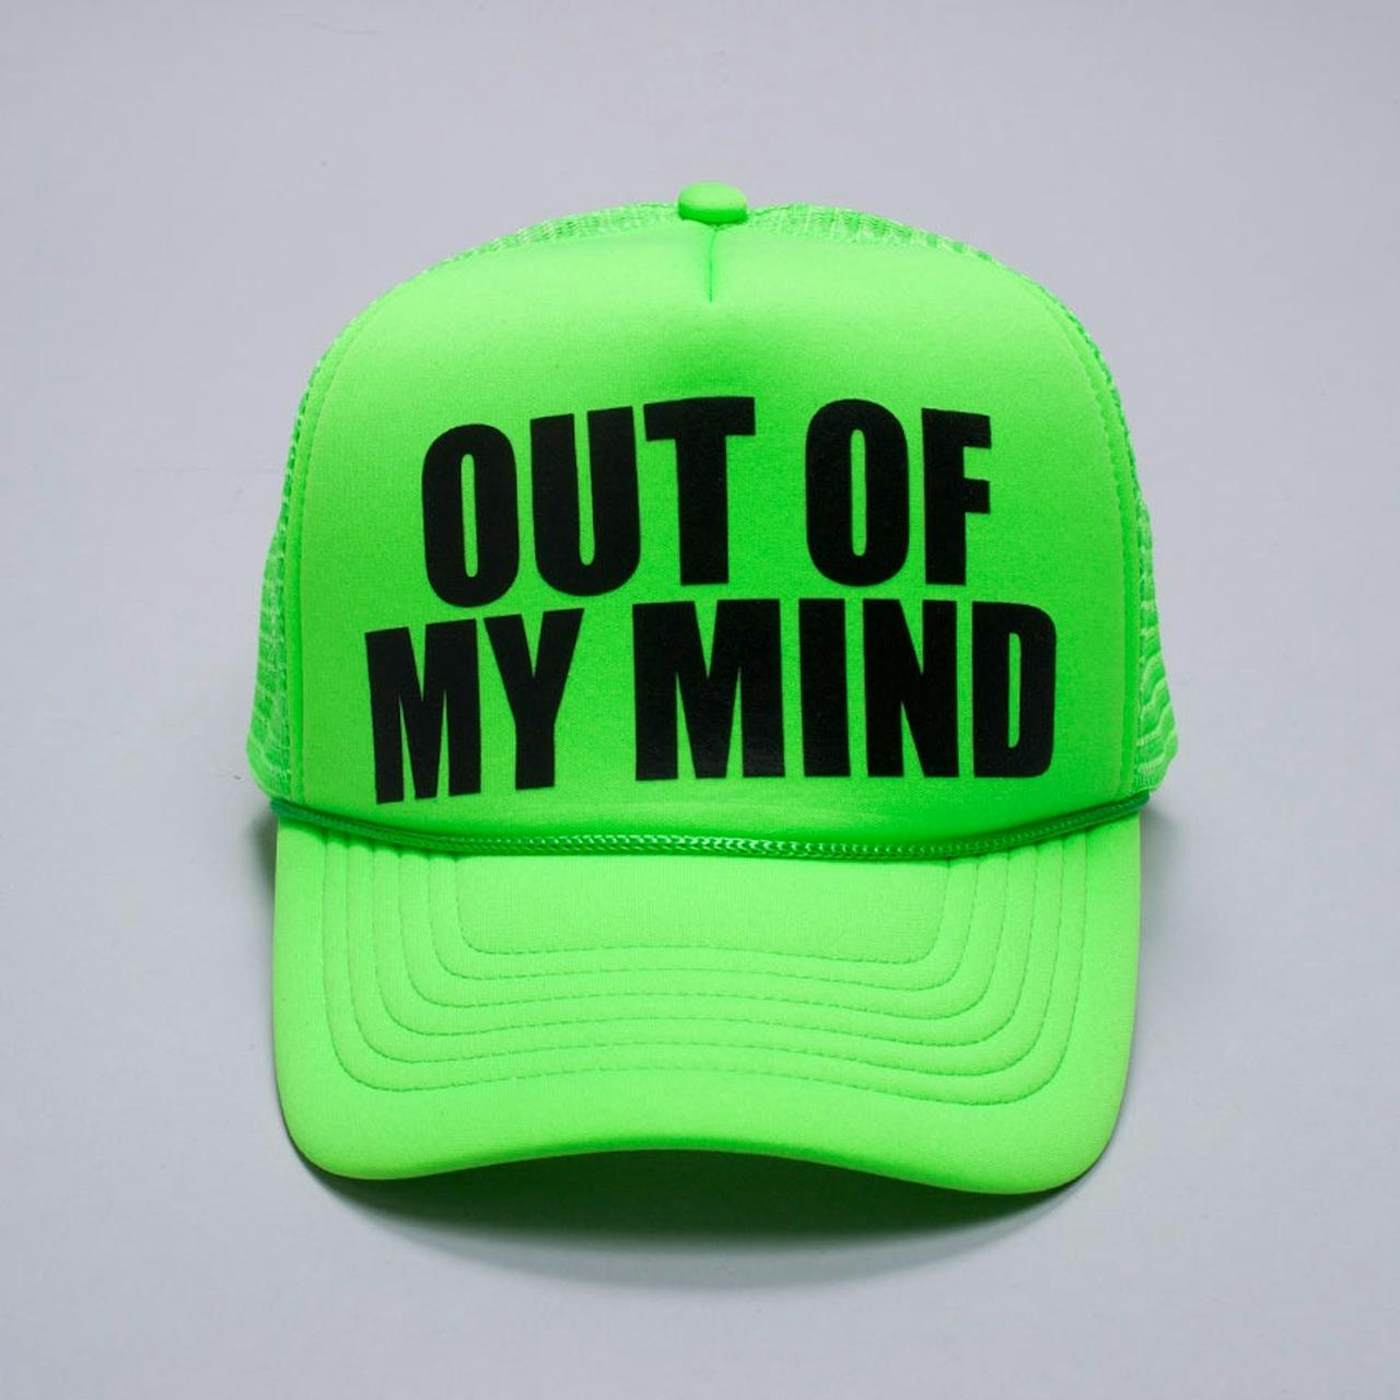 Bingo Players Out Of My Mind Trucker Hat